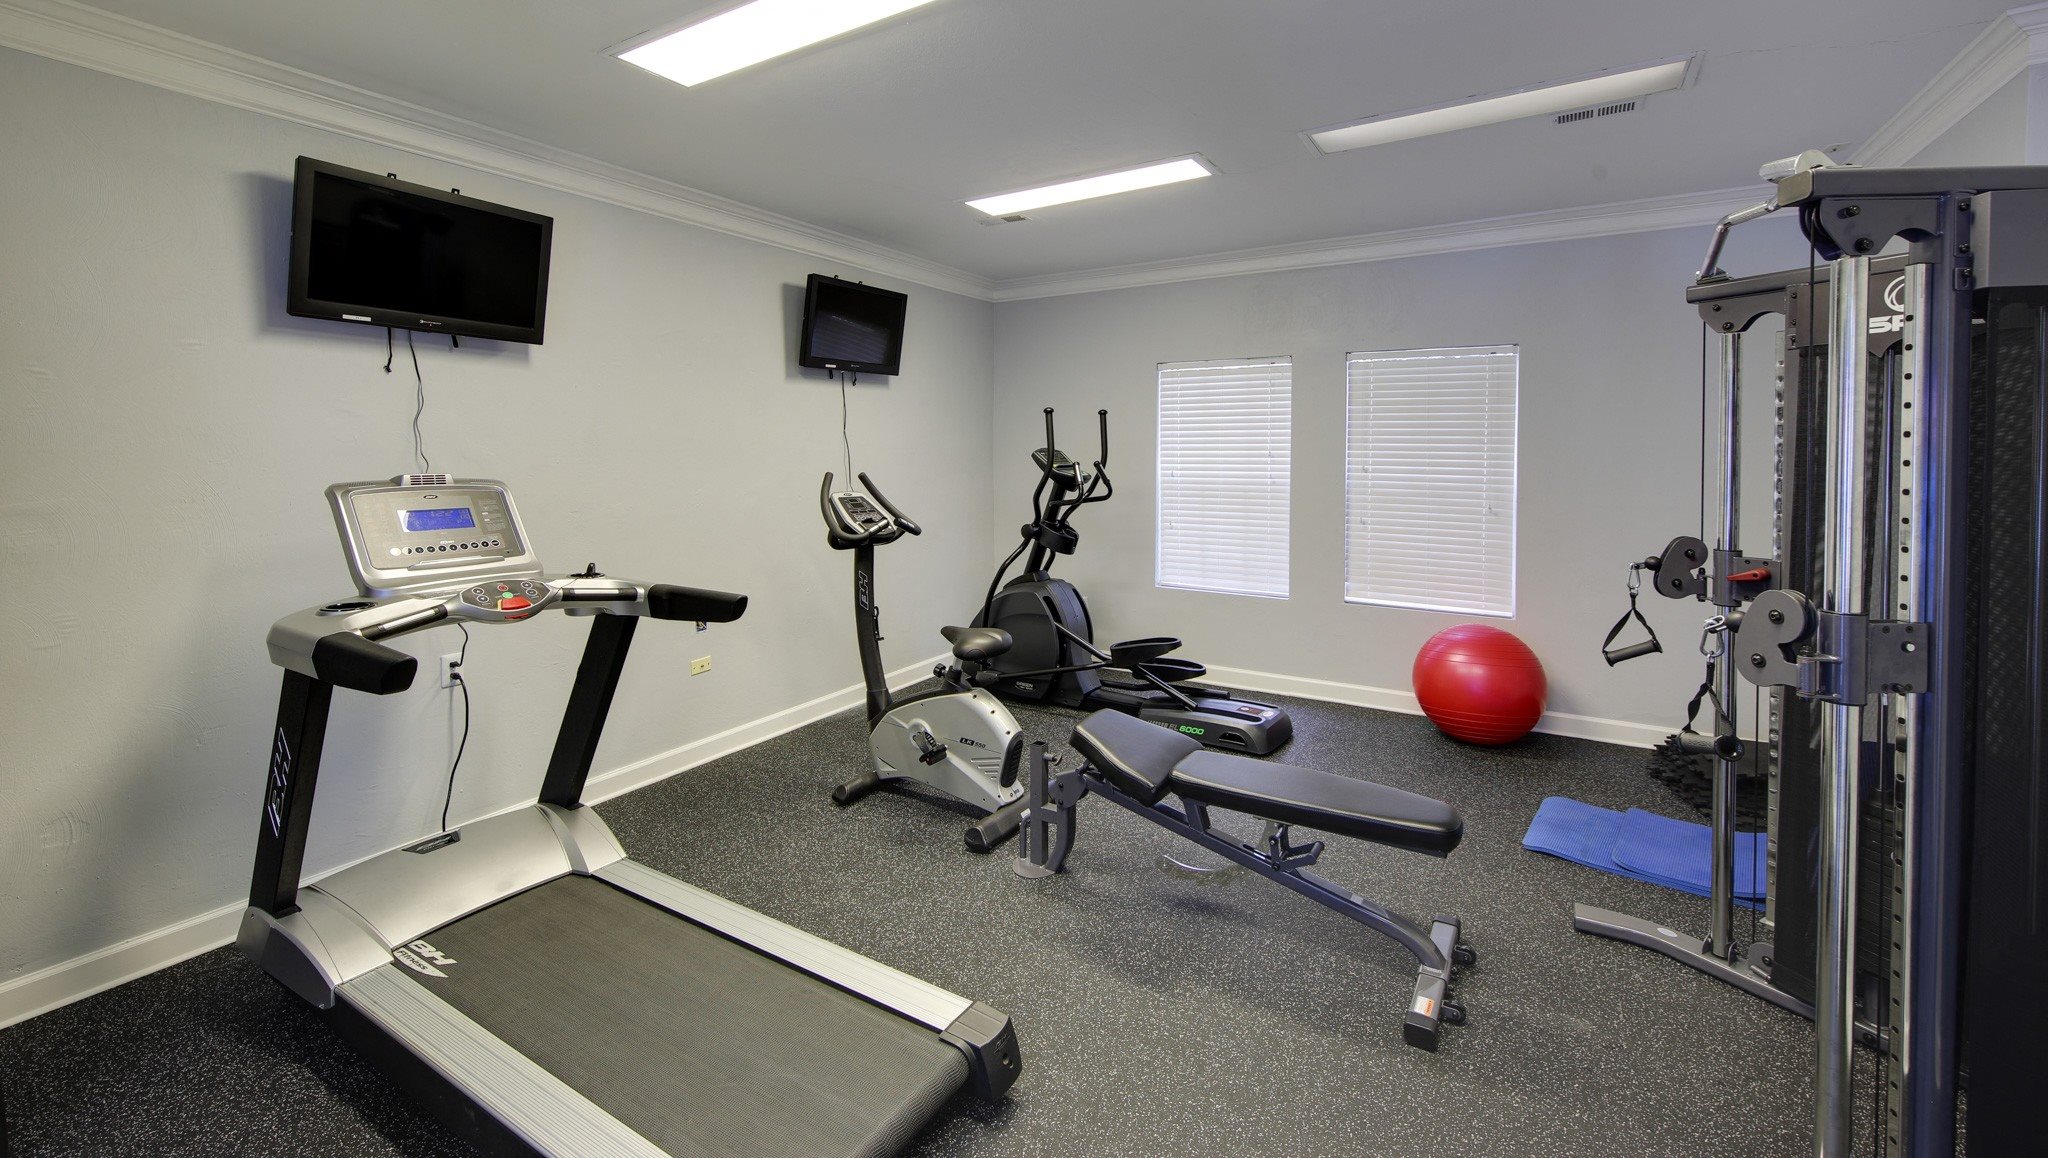 Fitness Center at Terrace at Olde Battleground apartments in Greensboro, NC